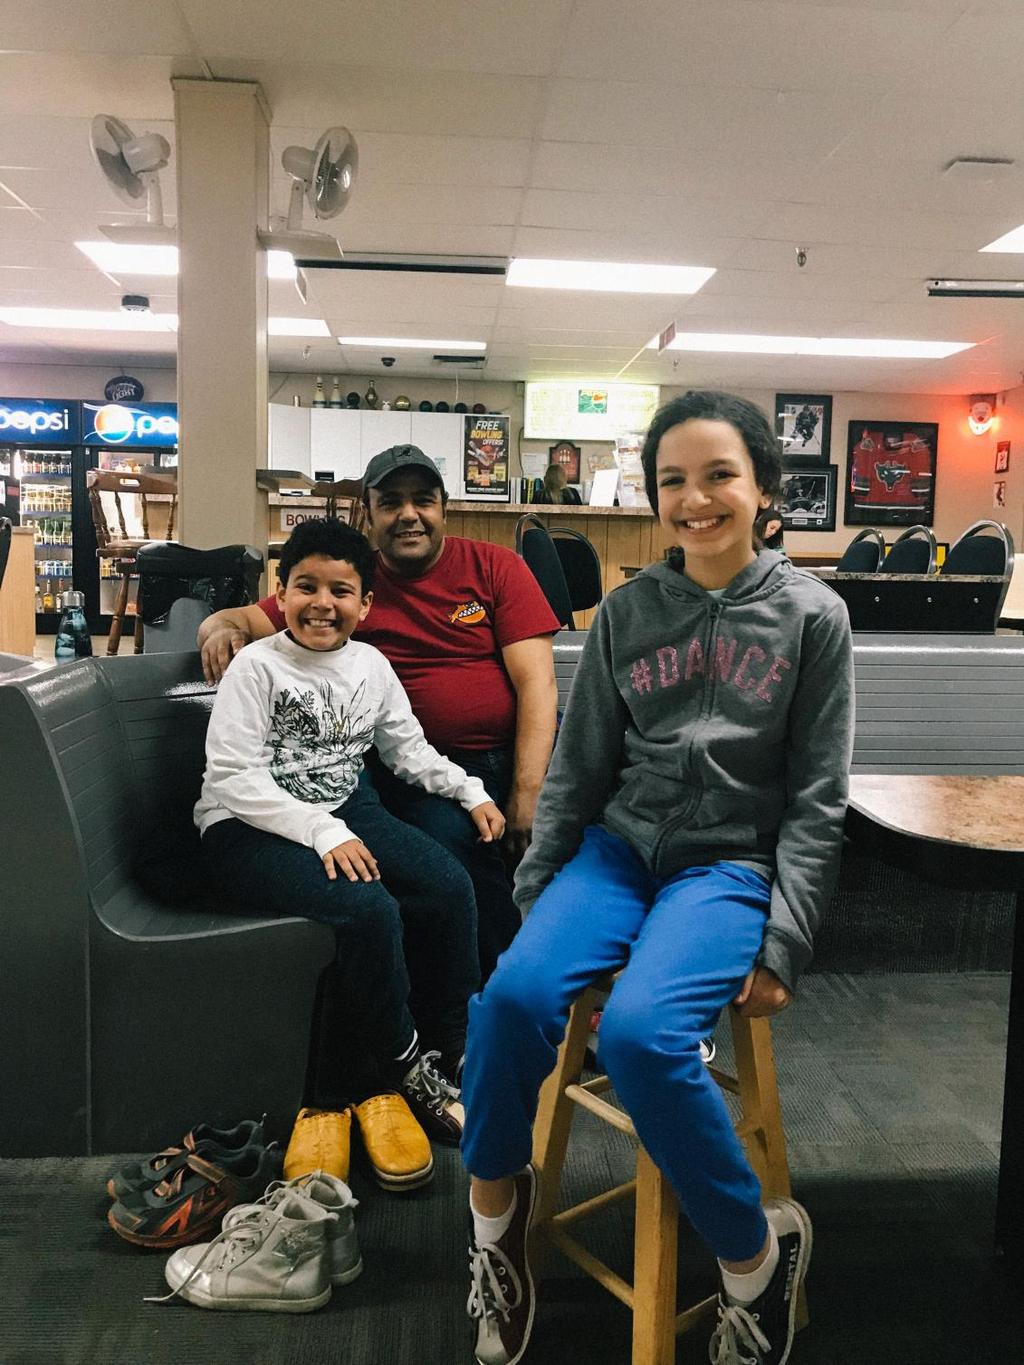 Family Events (All Ages) Spring 20196 The purpose of Family Events is to provide families with opportunities to enjoy a variety of fun activities in a safe, supportive, non-judgmental environment.